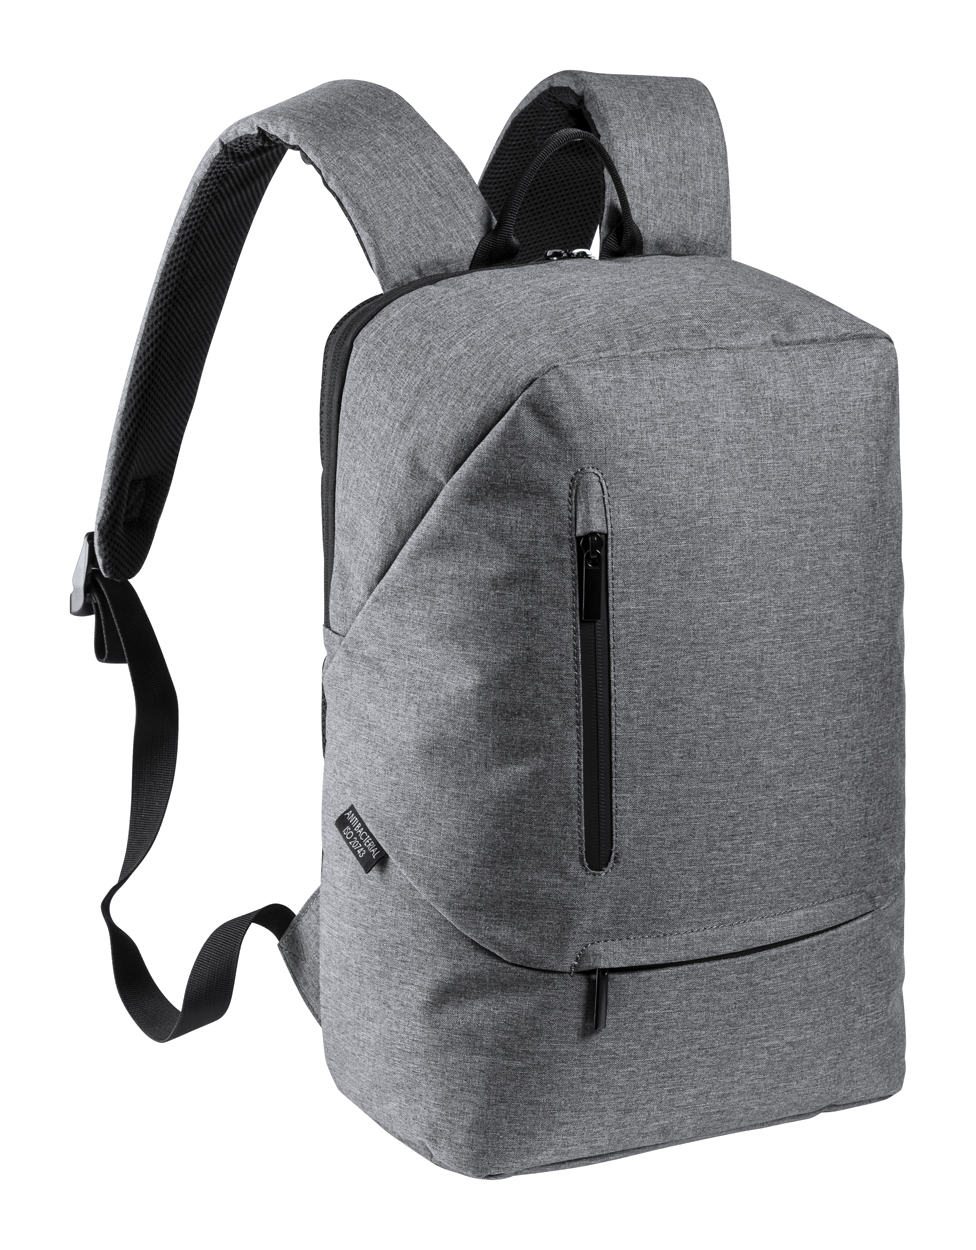 Urban backpack MORDUX with antibacterial protection - grey / black